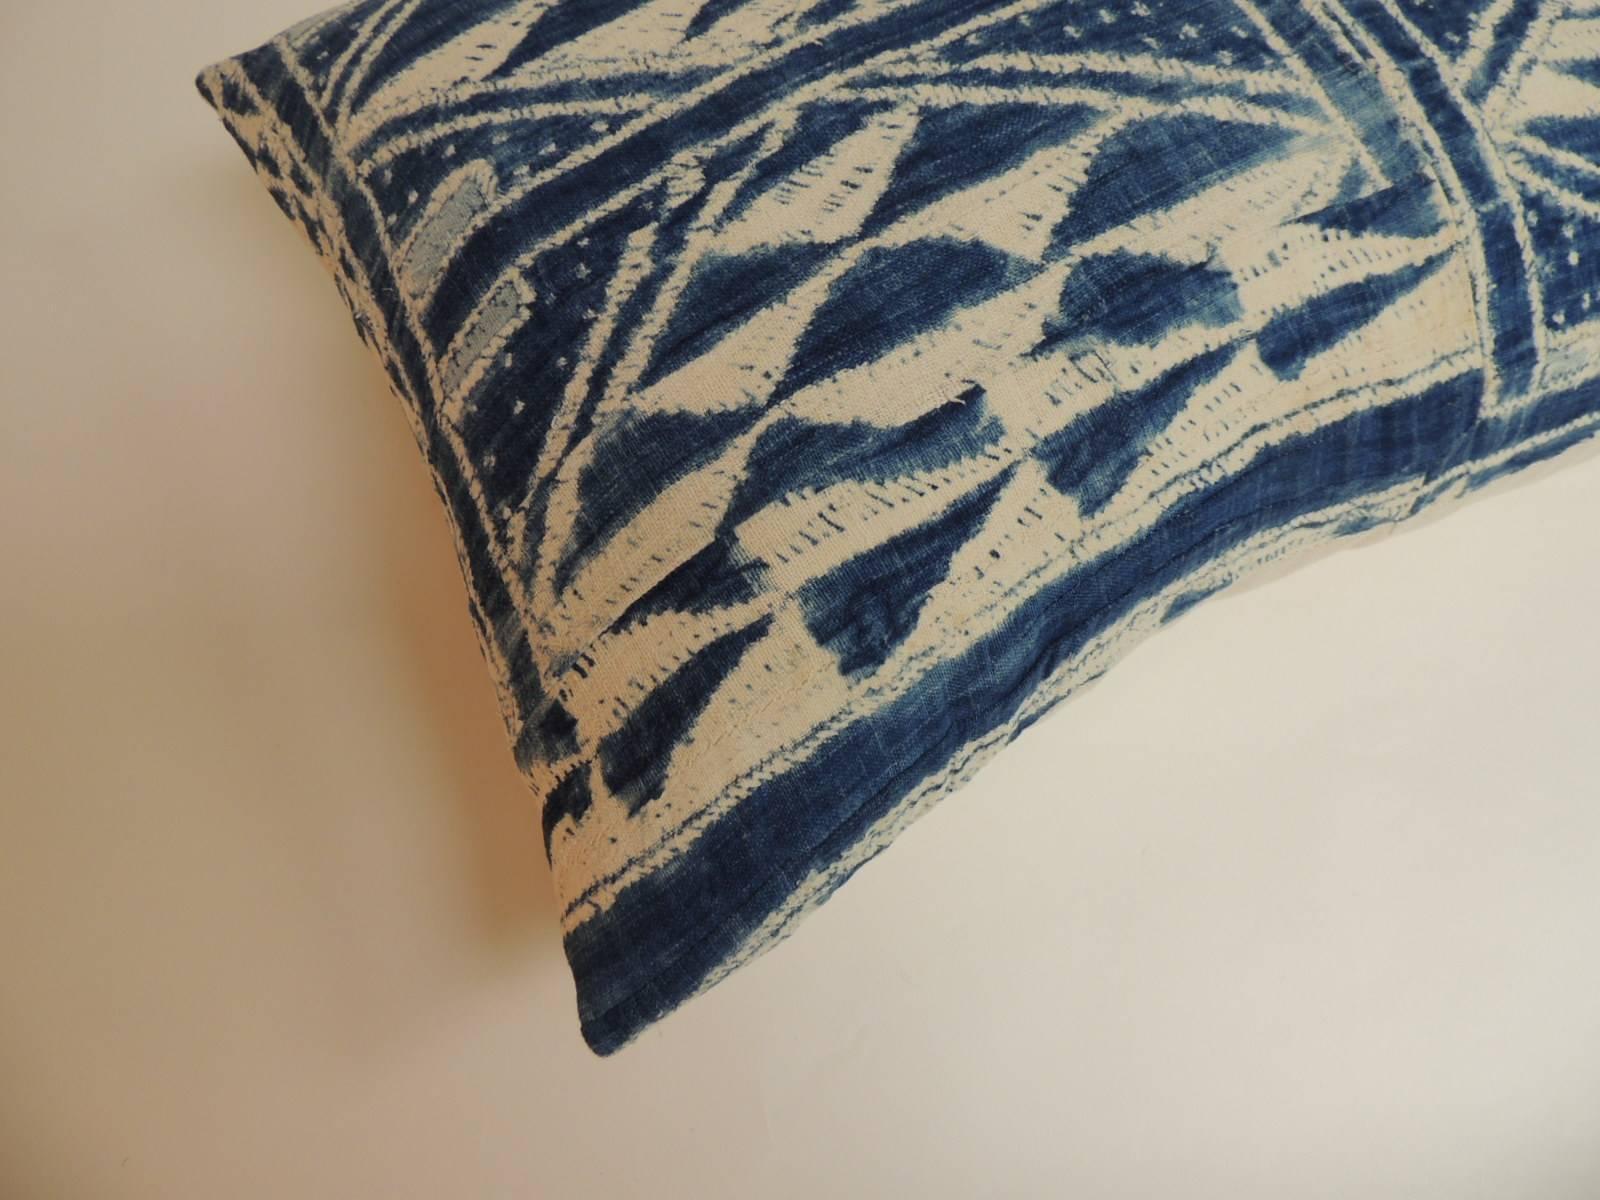 Hand-Crafted 19th Century Blue and White “Ndop” African Woven Decorative Bolster Pillow